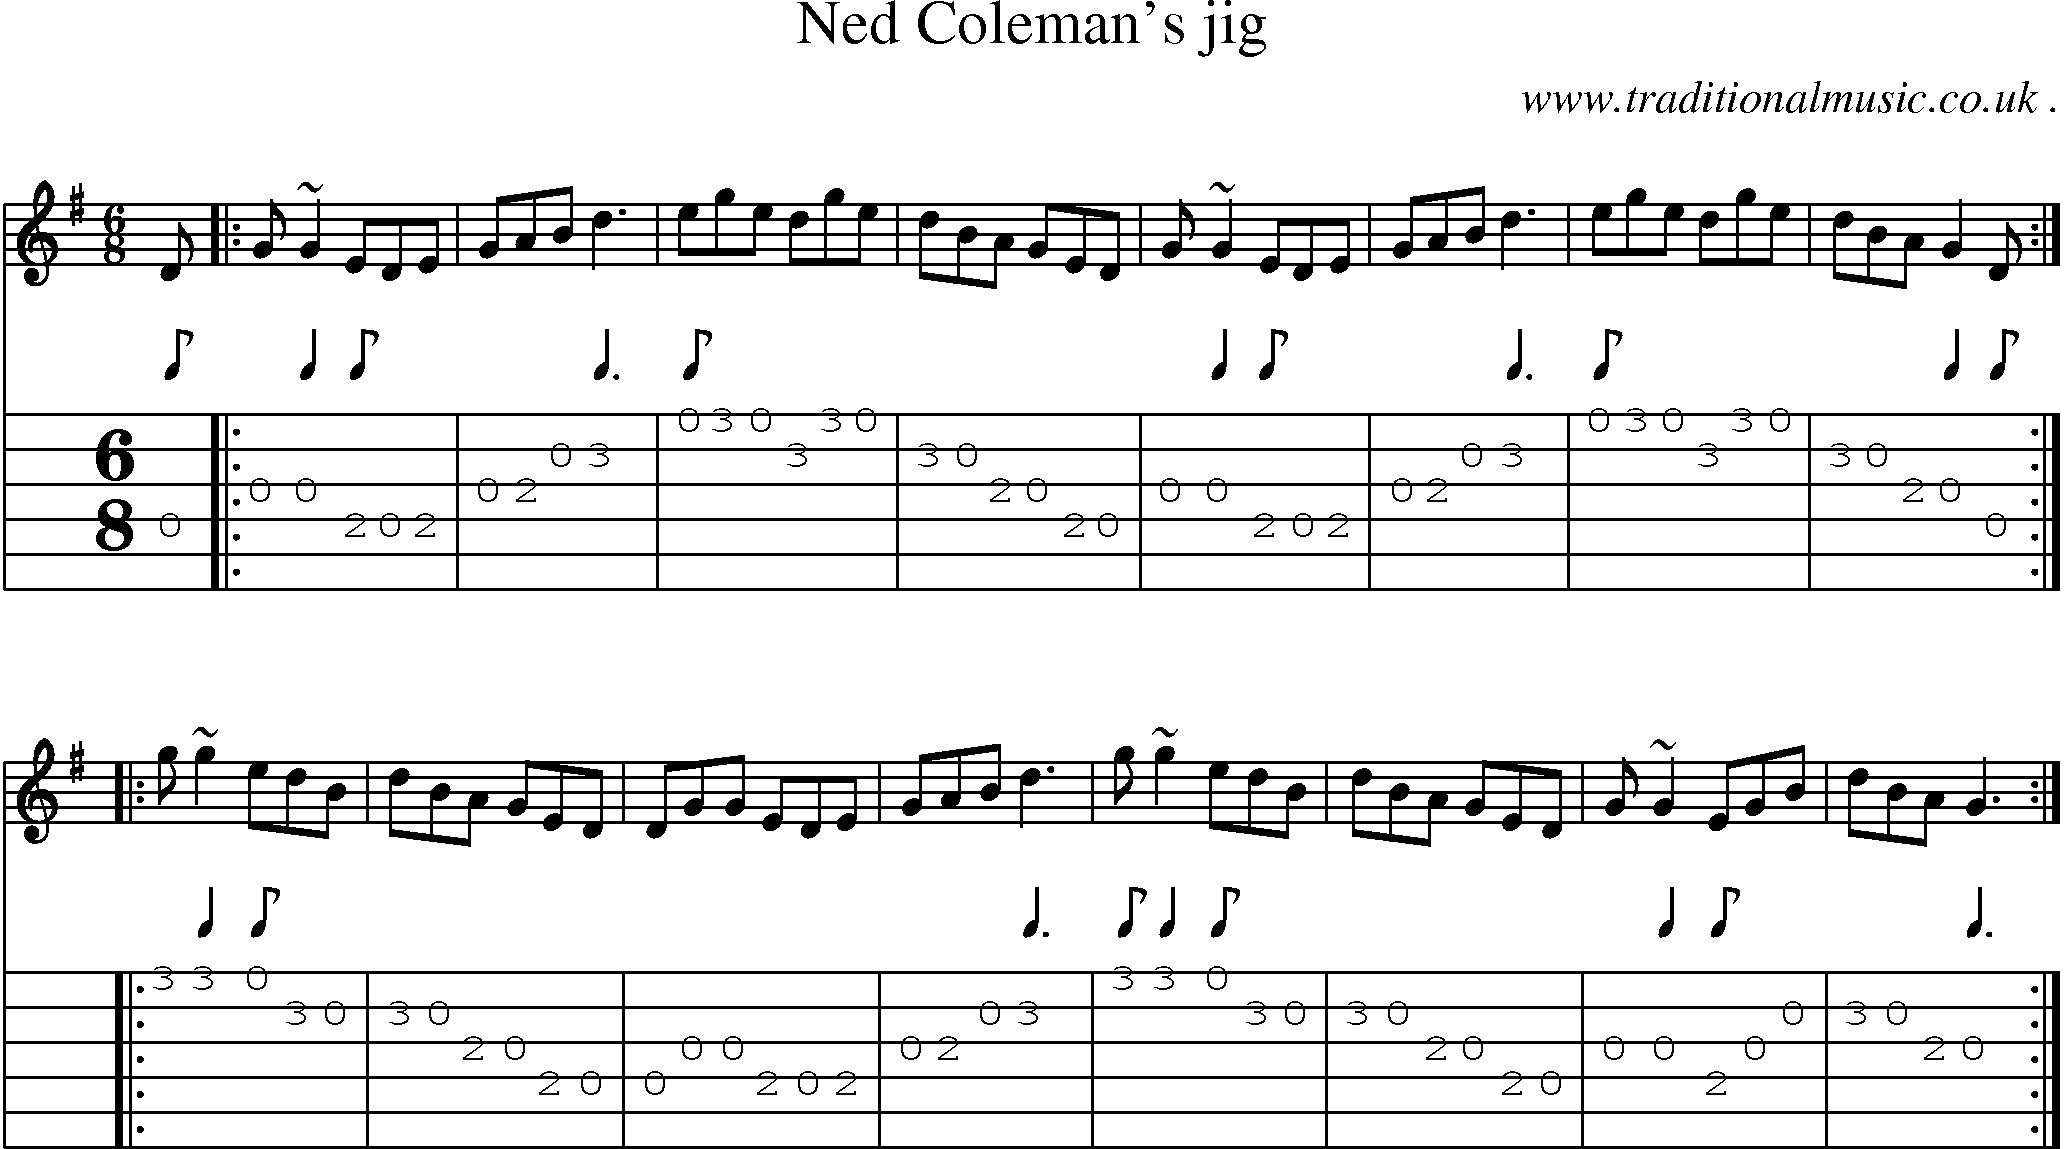 Sheet-music  score, Chords and Guitar Tabs for Ned Colemans Jig